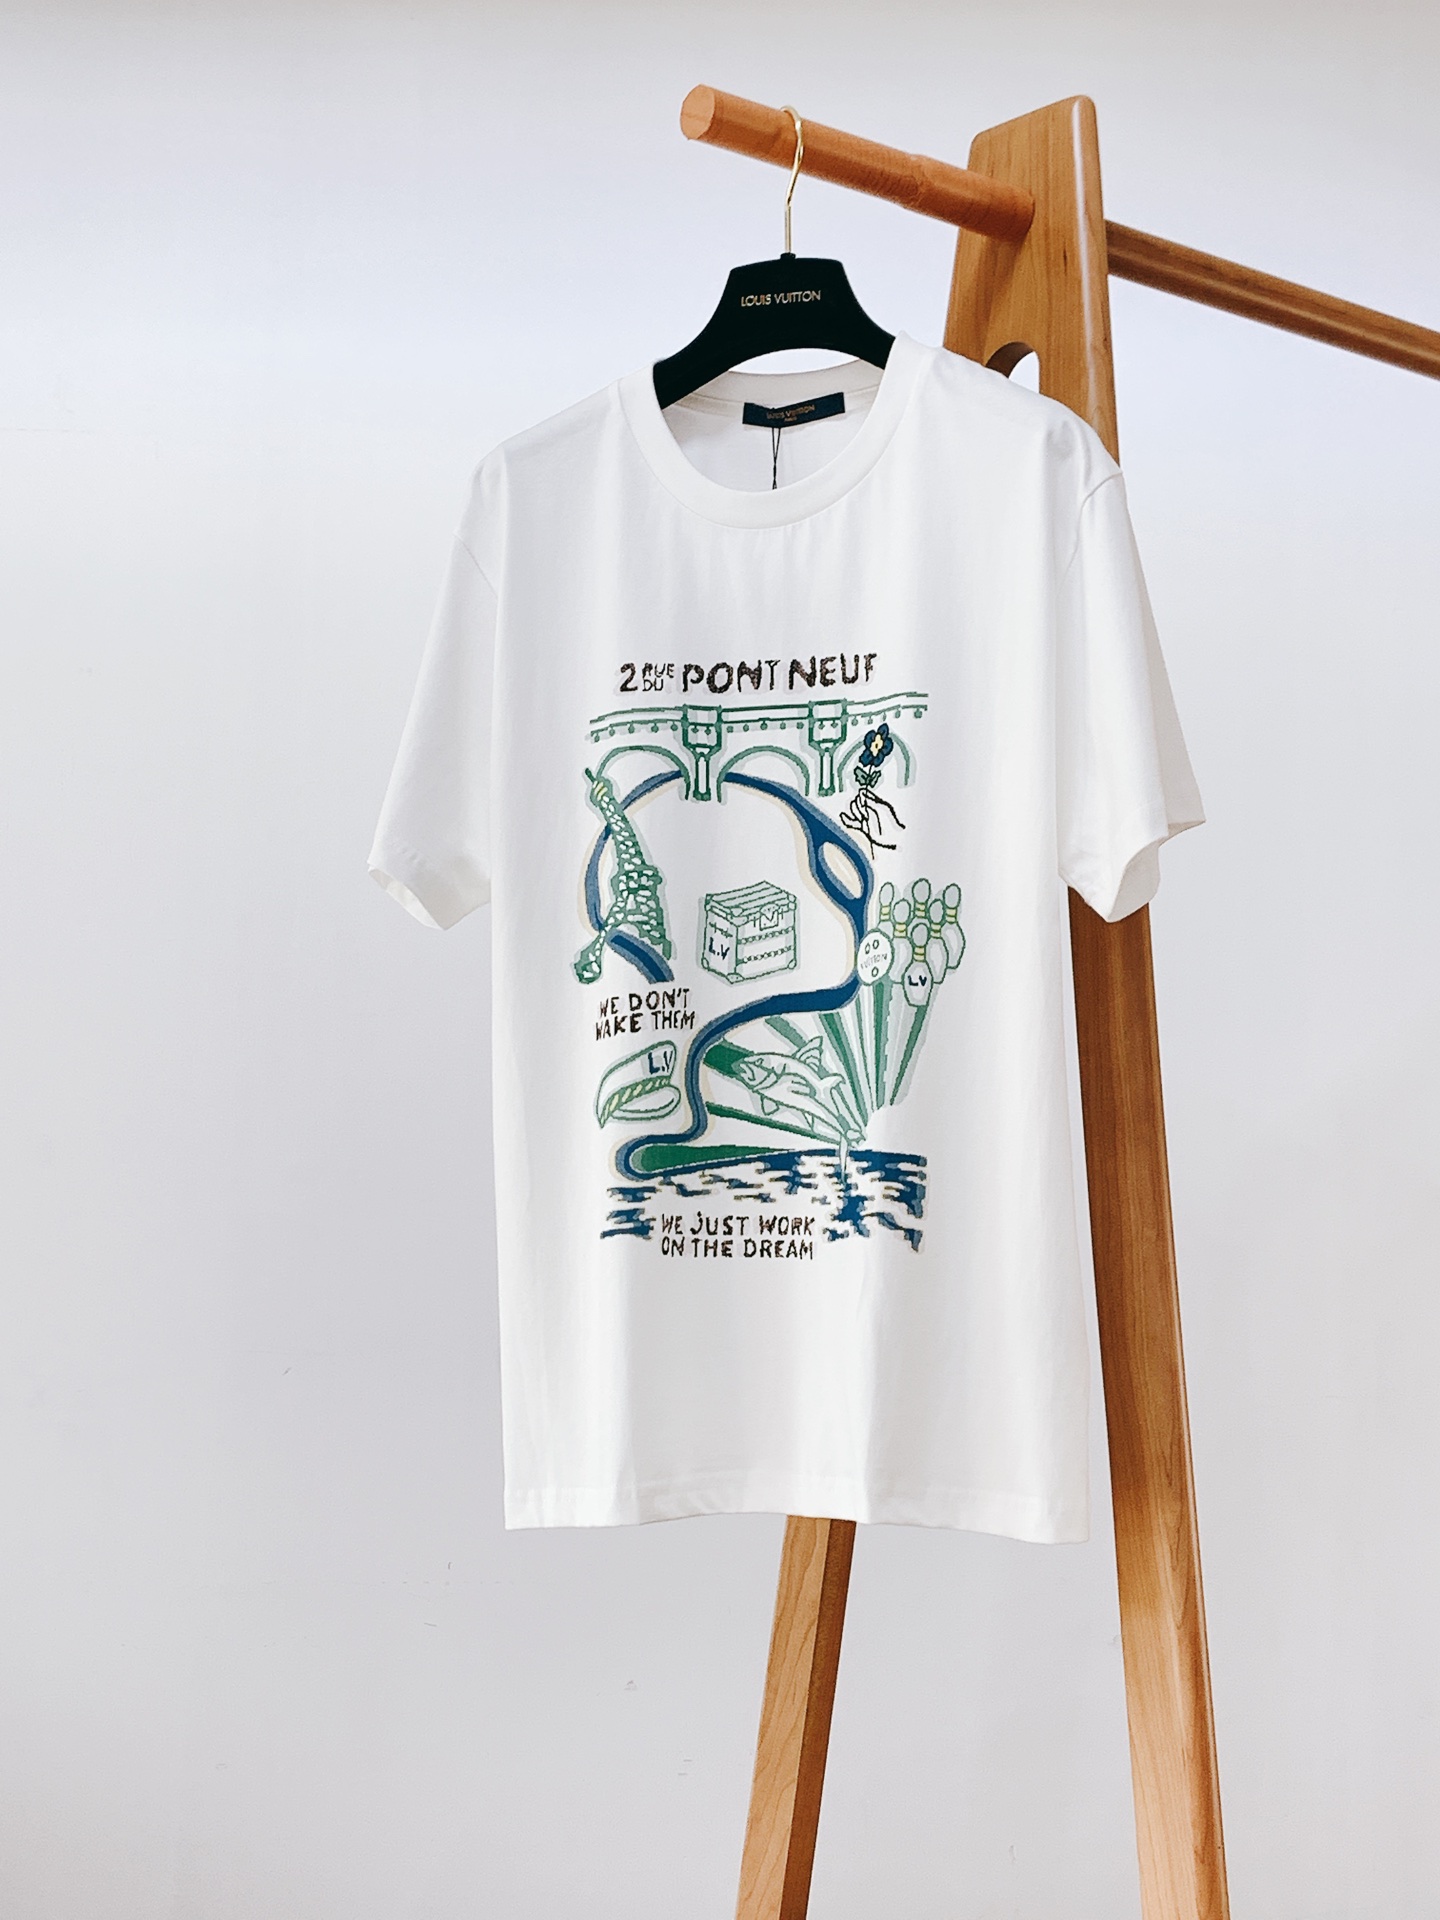 Louis Vuitton Clothing T-Shirt Every Designer
 Printing Unisex Cotton Spring/Summer Collection Fashion